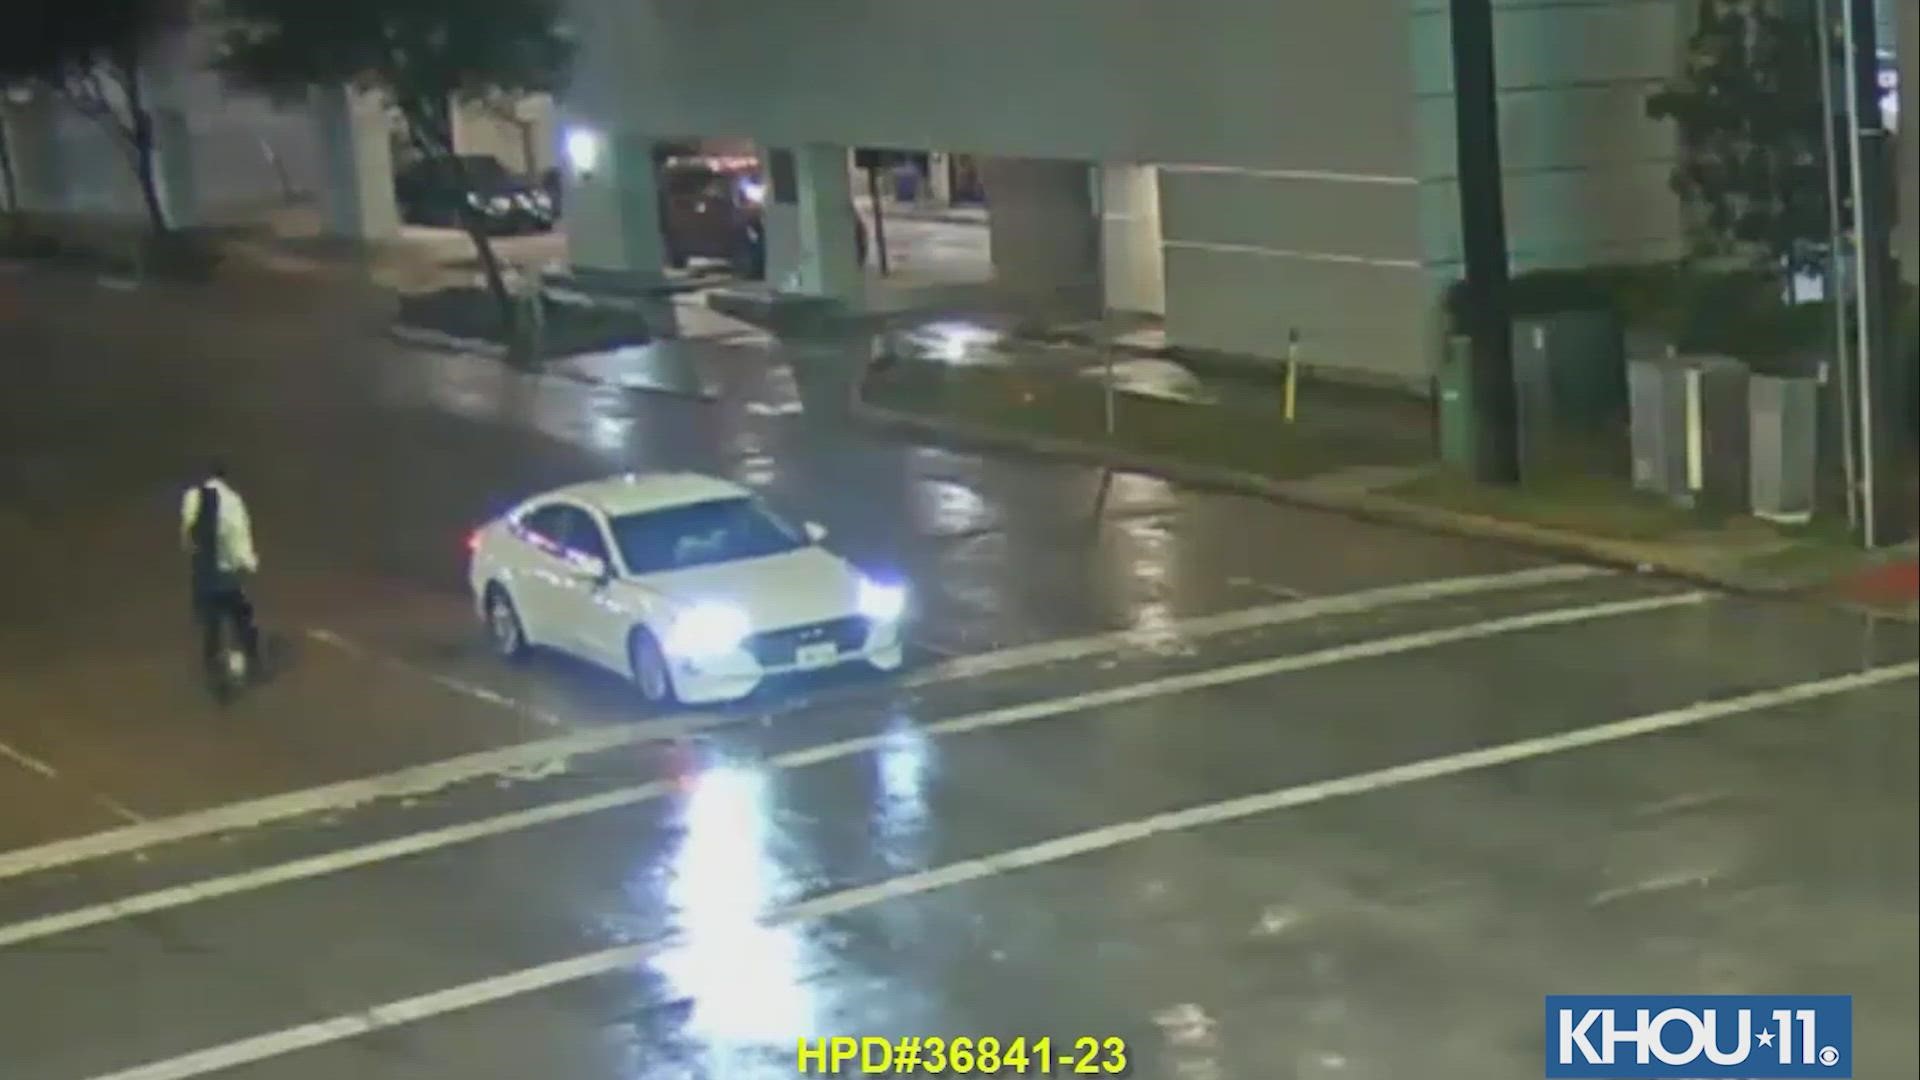 Houston police released new video showing the moment a man was shot and robbed while leaving a concert in January.